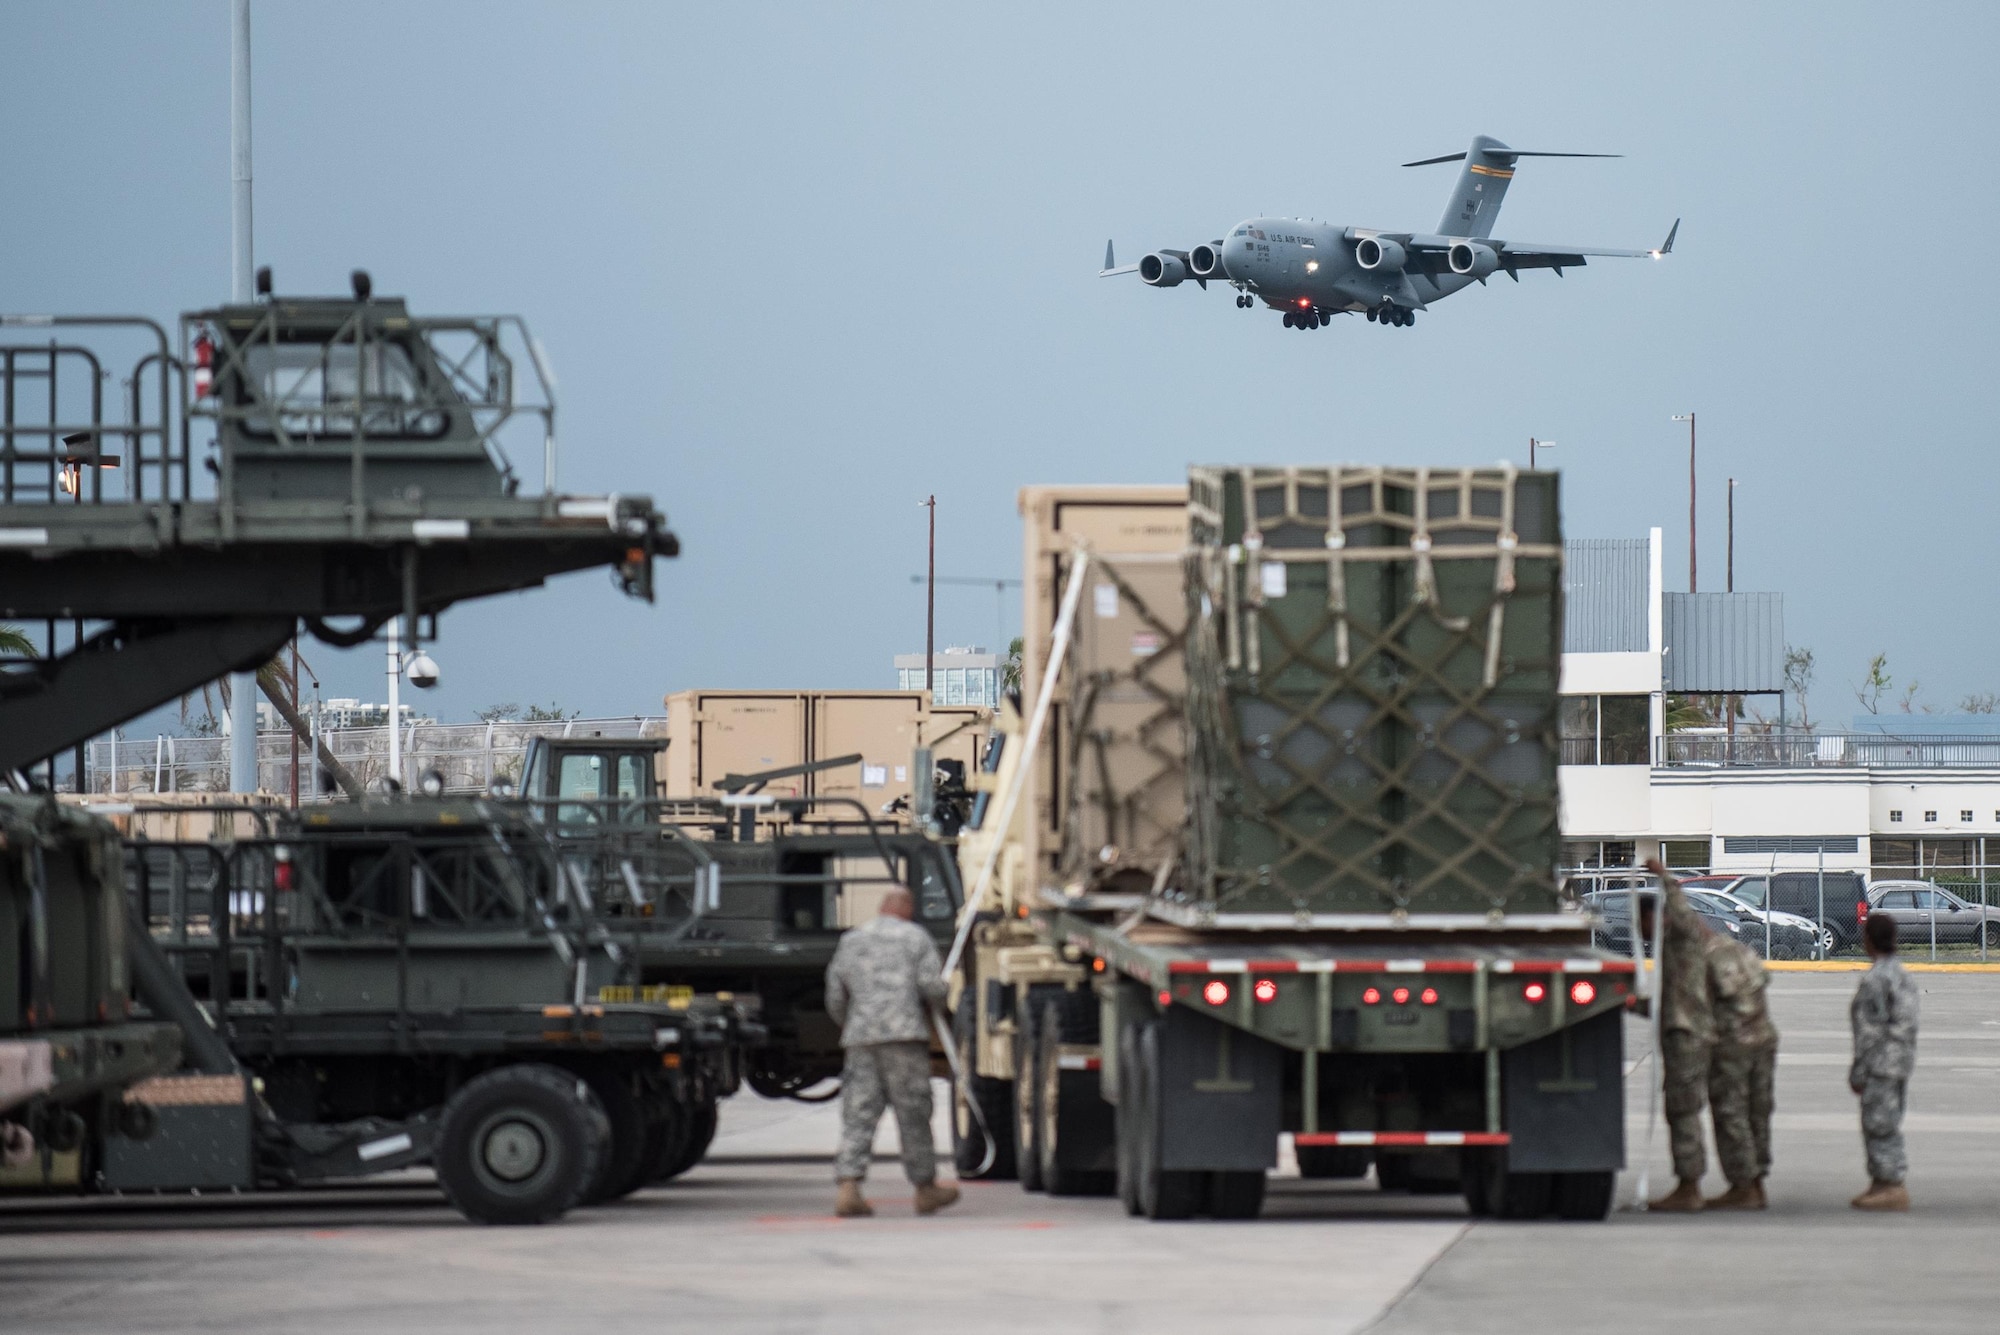 Airmen from the Kentucky Air National Guard’s 123rd Contingency Response Group, augmented by troops from the active-duty Air Force and Air National Guard units in multiple states, load relief supplies onto trucks for distribution at Luis Muñoz Marín International Airport in San Juan, Puerto Rico, in the wake of Hurricane Maria Oct. 5, 2017. The unit’s Airmen established an aerial port of debarkation upon arrival here Sept. 23, and have processed more than 7.2 million pounds of cargo and humanitarian aid for distribution in the first three weeks of the operation. (U.S. Air National Guard photo by Lt. Col. Dale Greer)